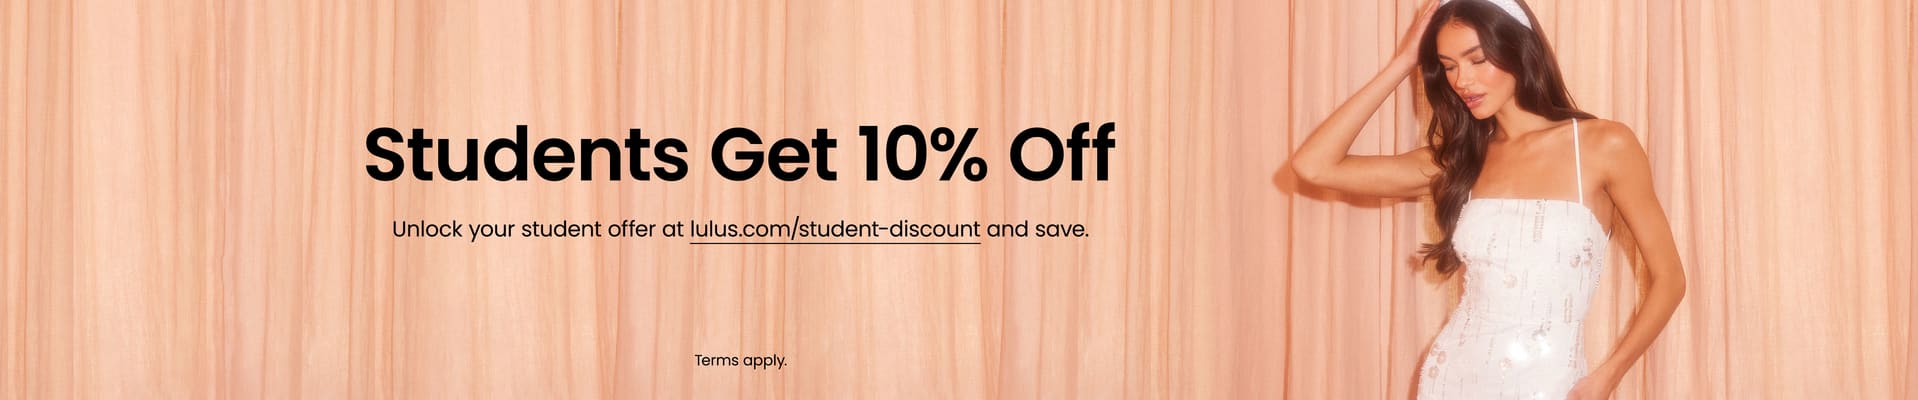 Student Discount Page